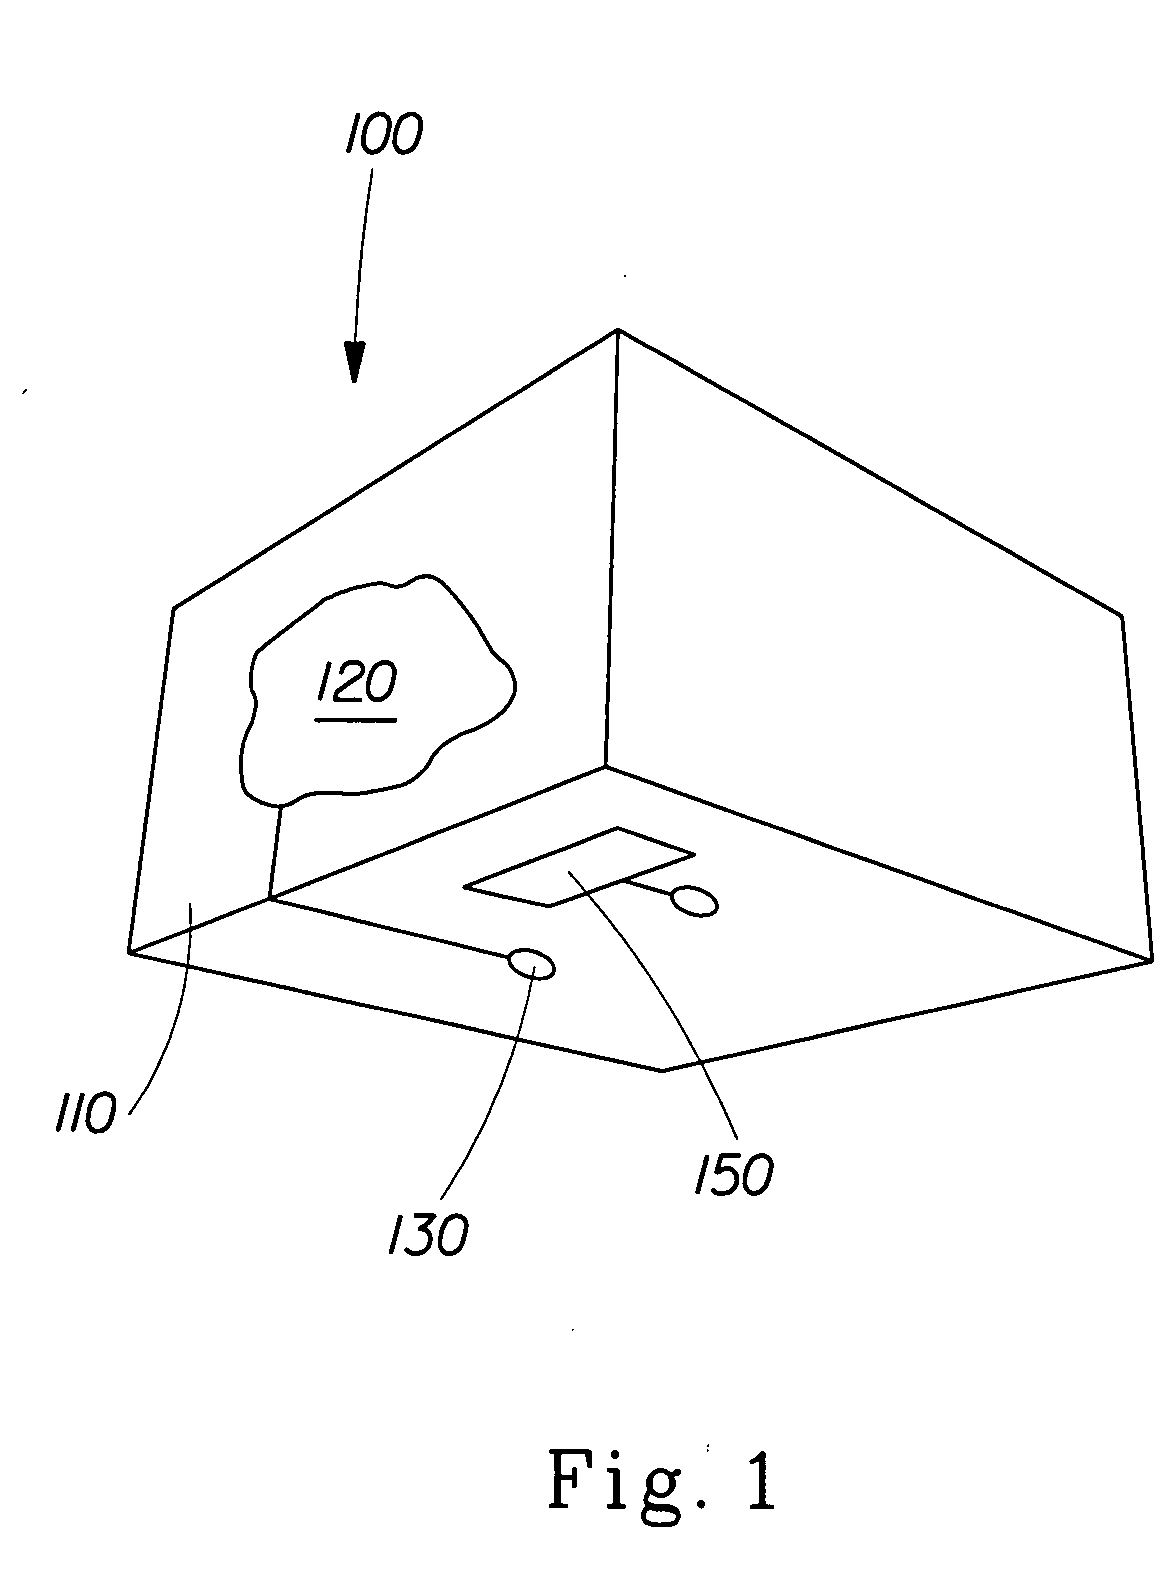 Package and merchandising system